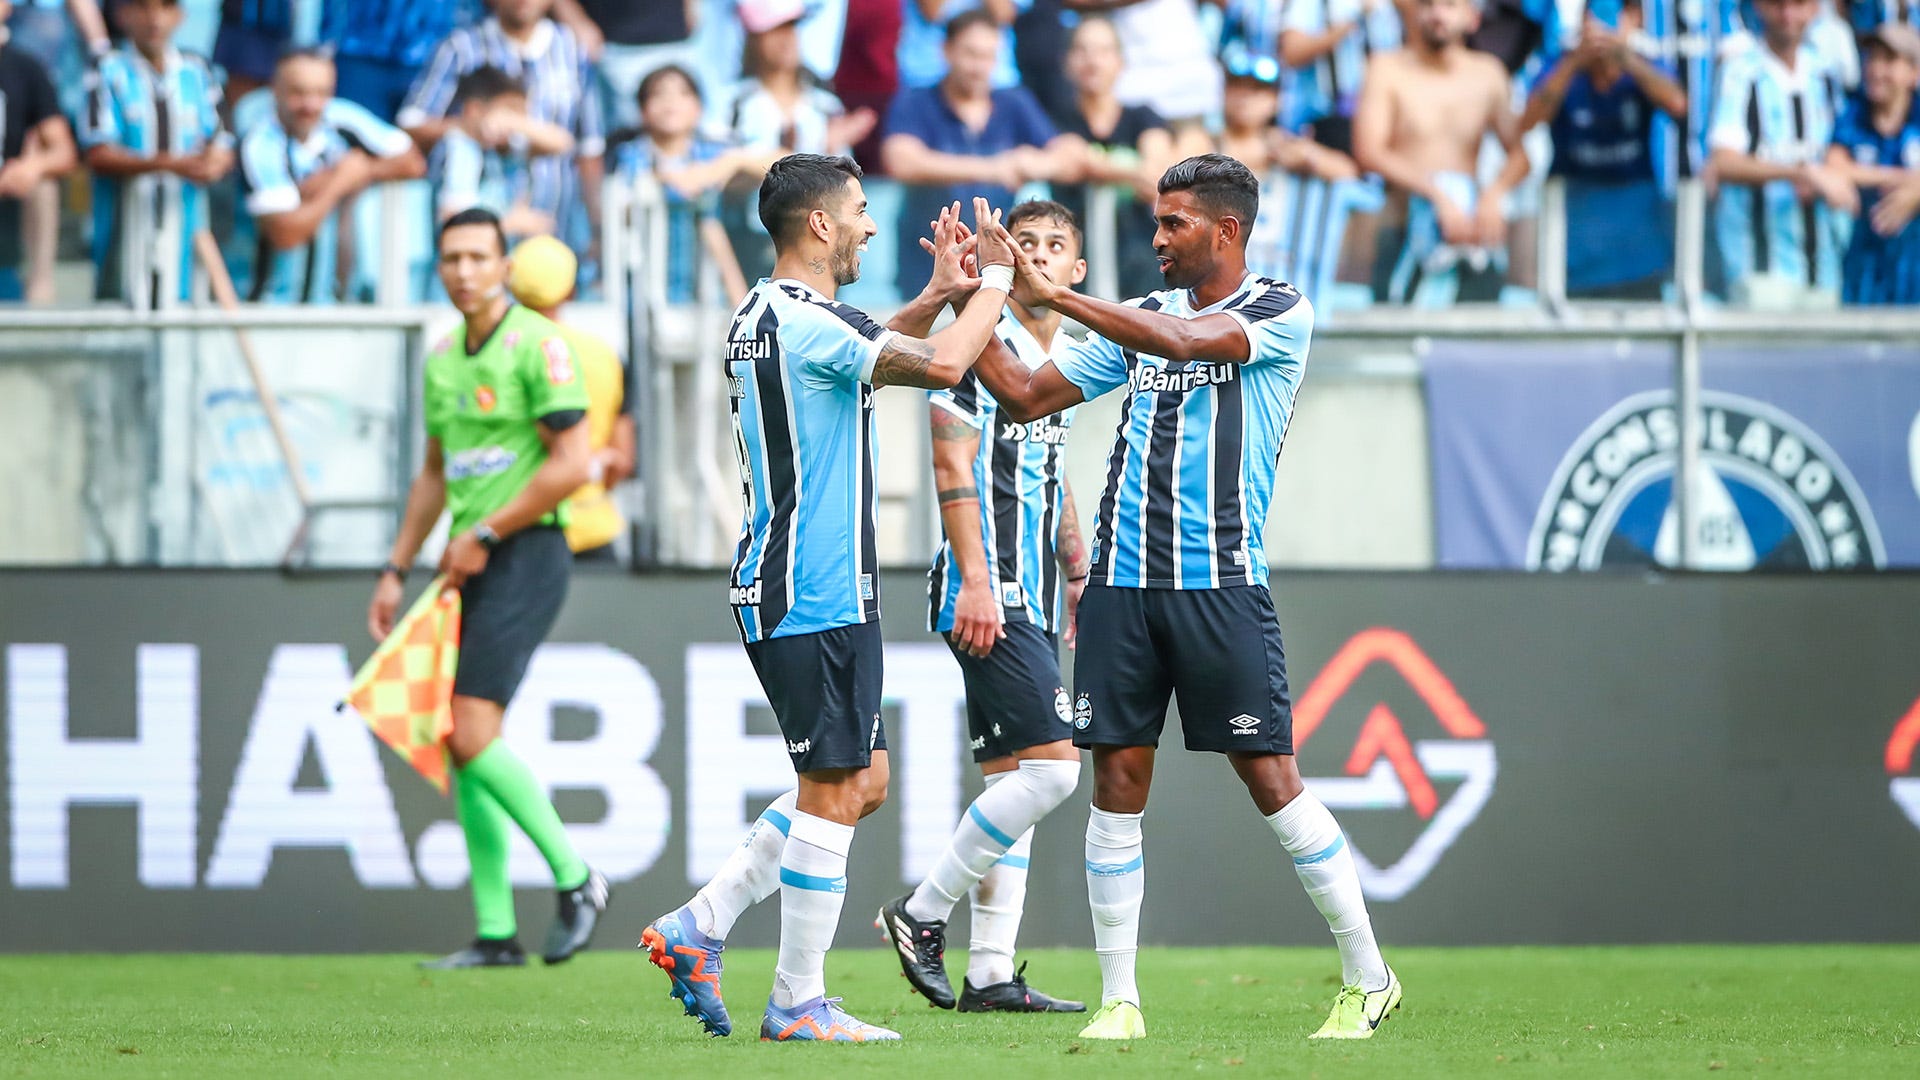 Gremio X: A Rivalry Rooted in Brazilian Football History